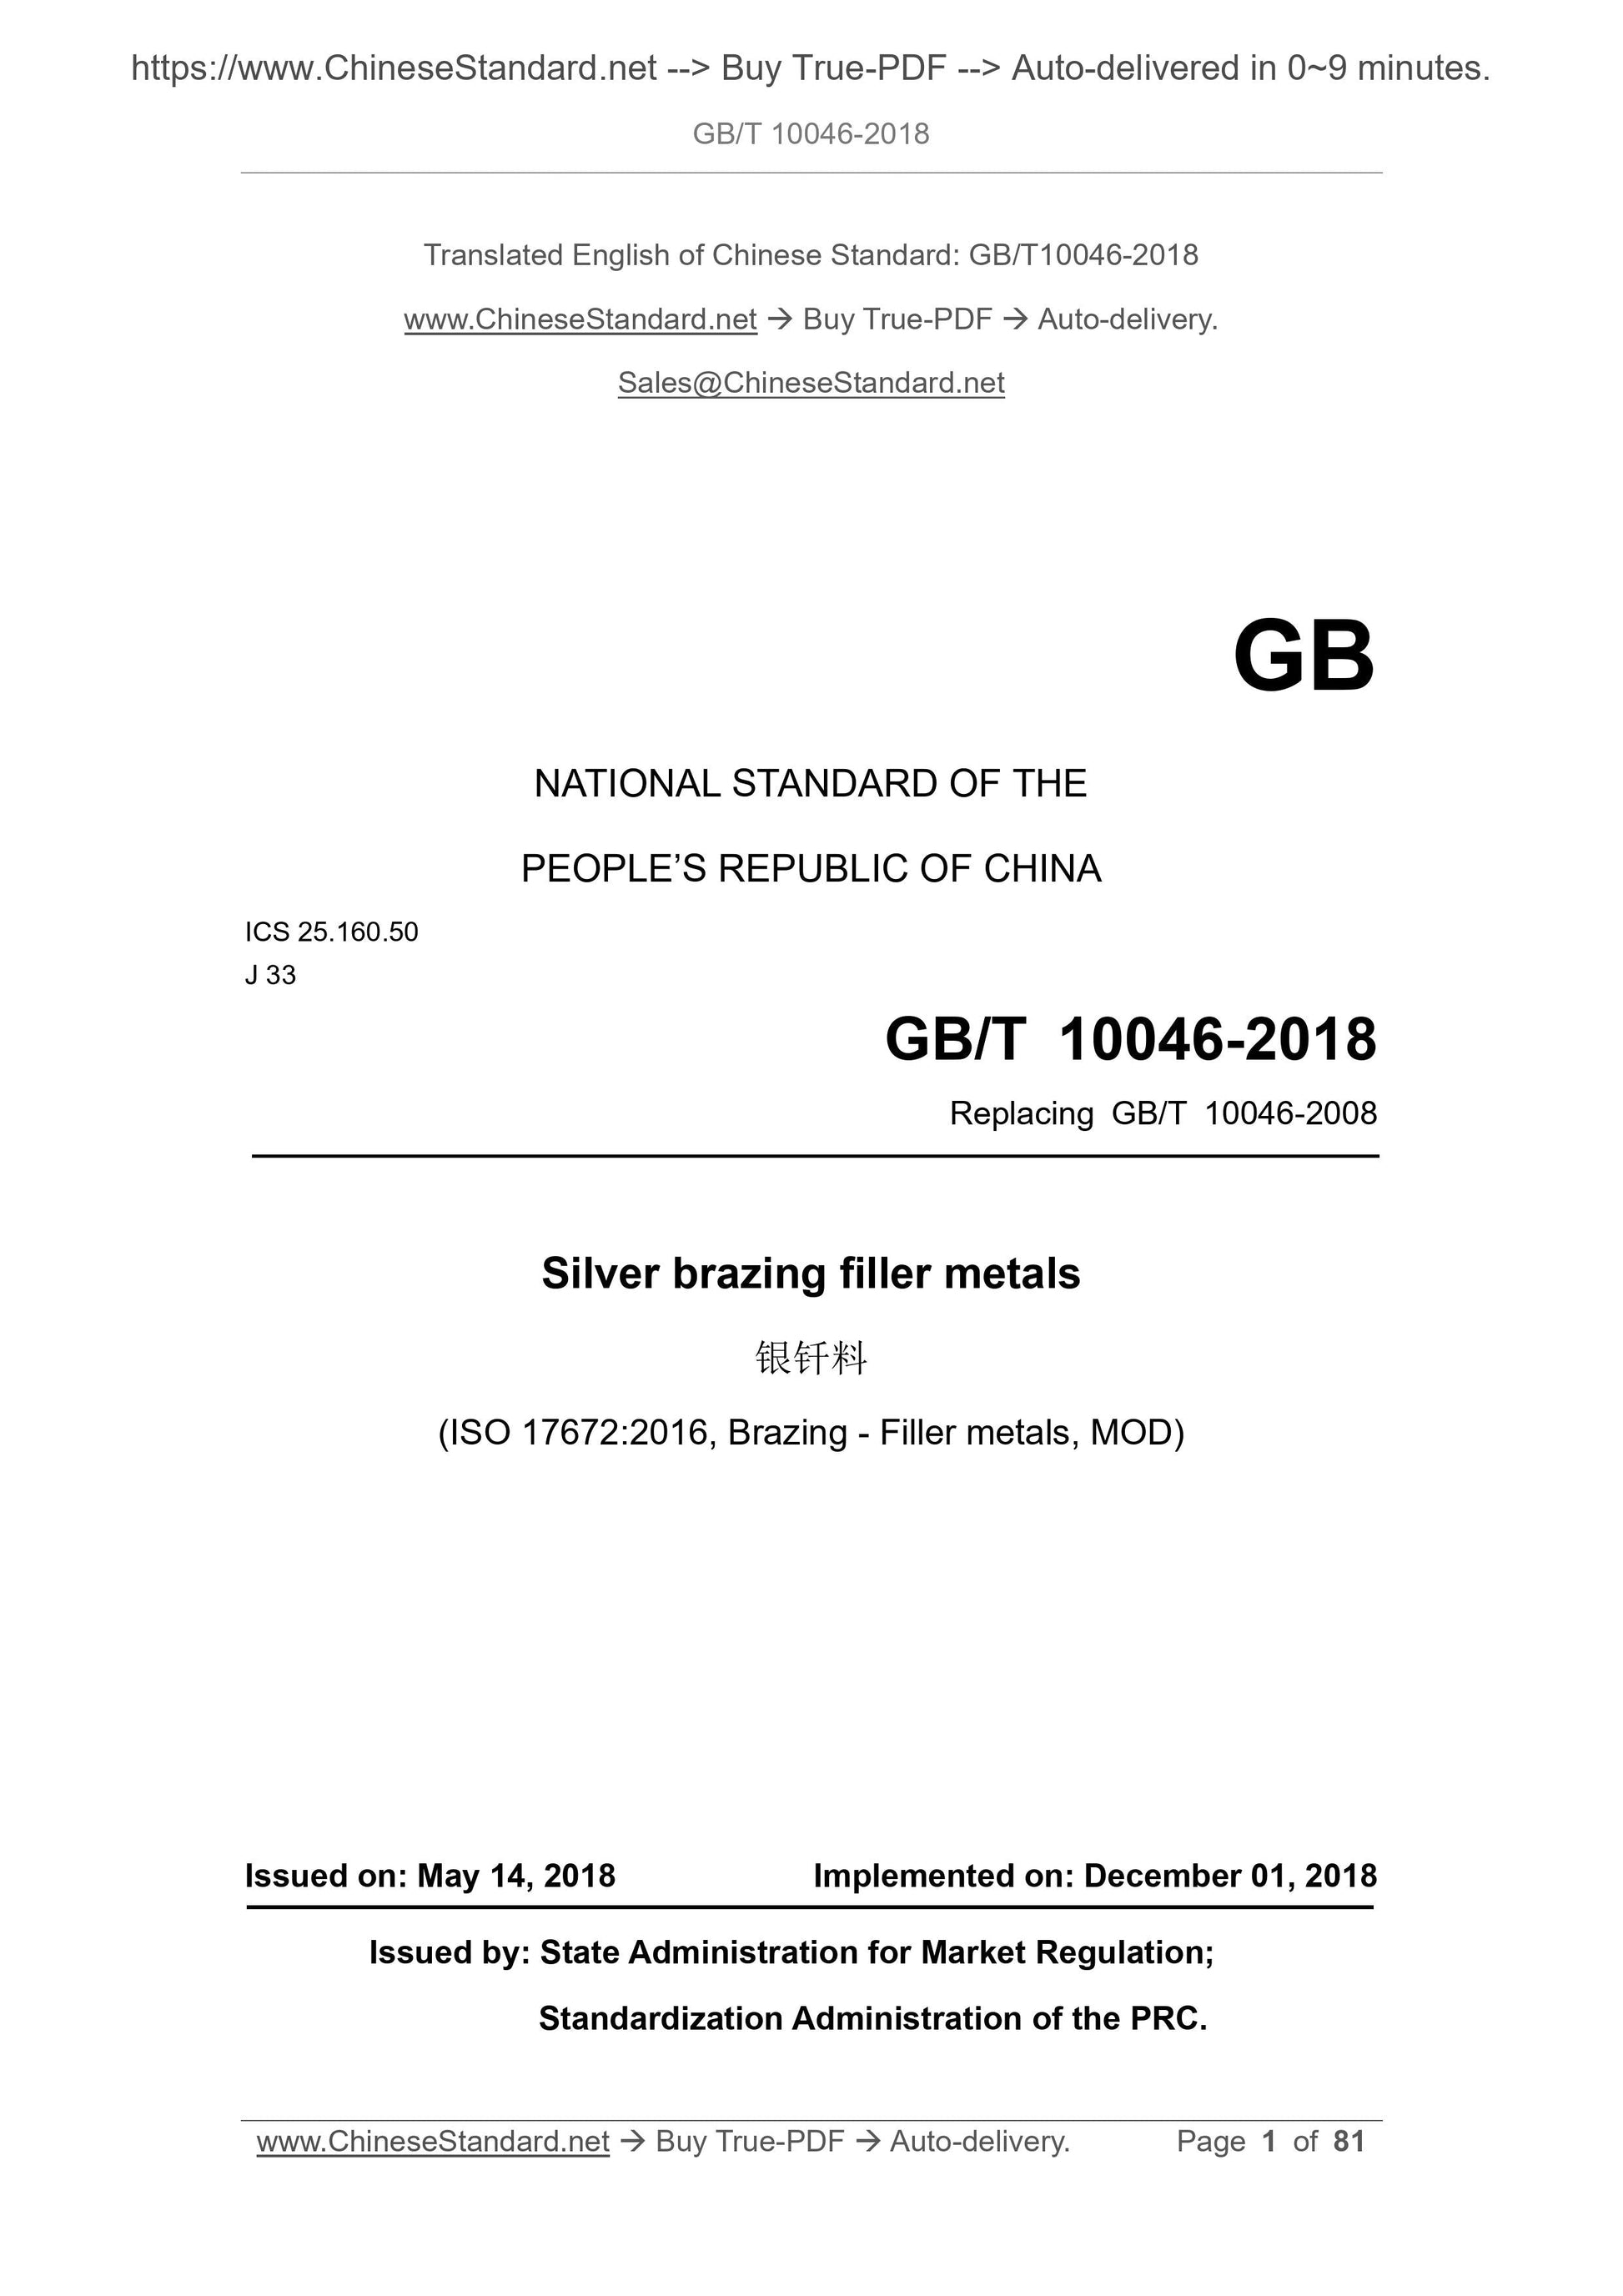 GB/T 10046-2018 Page 1